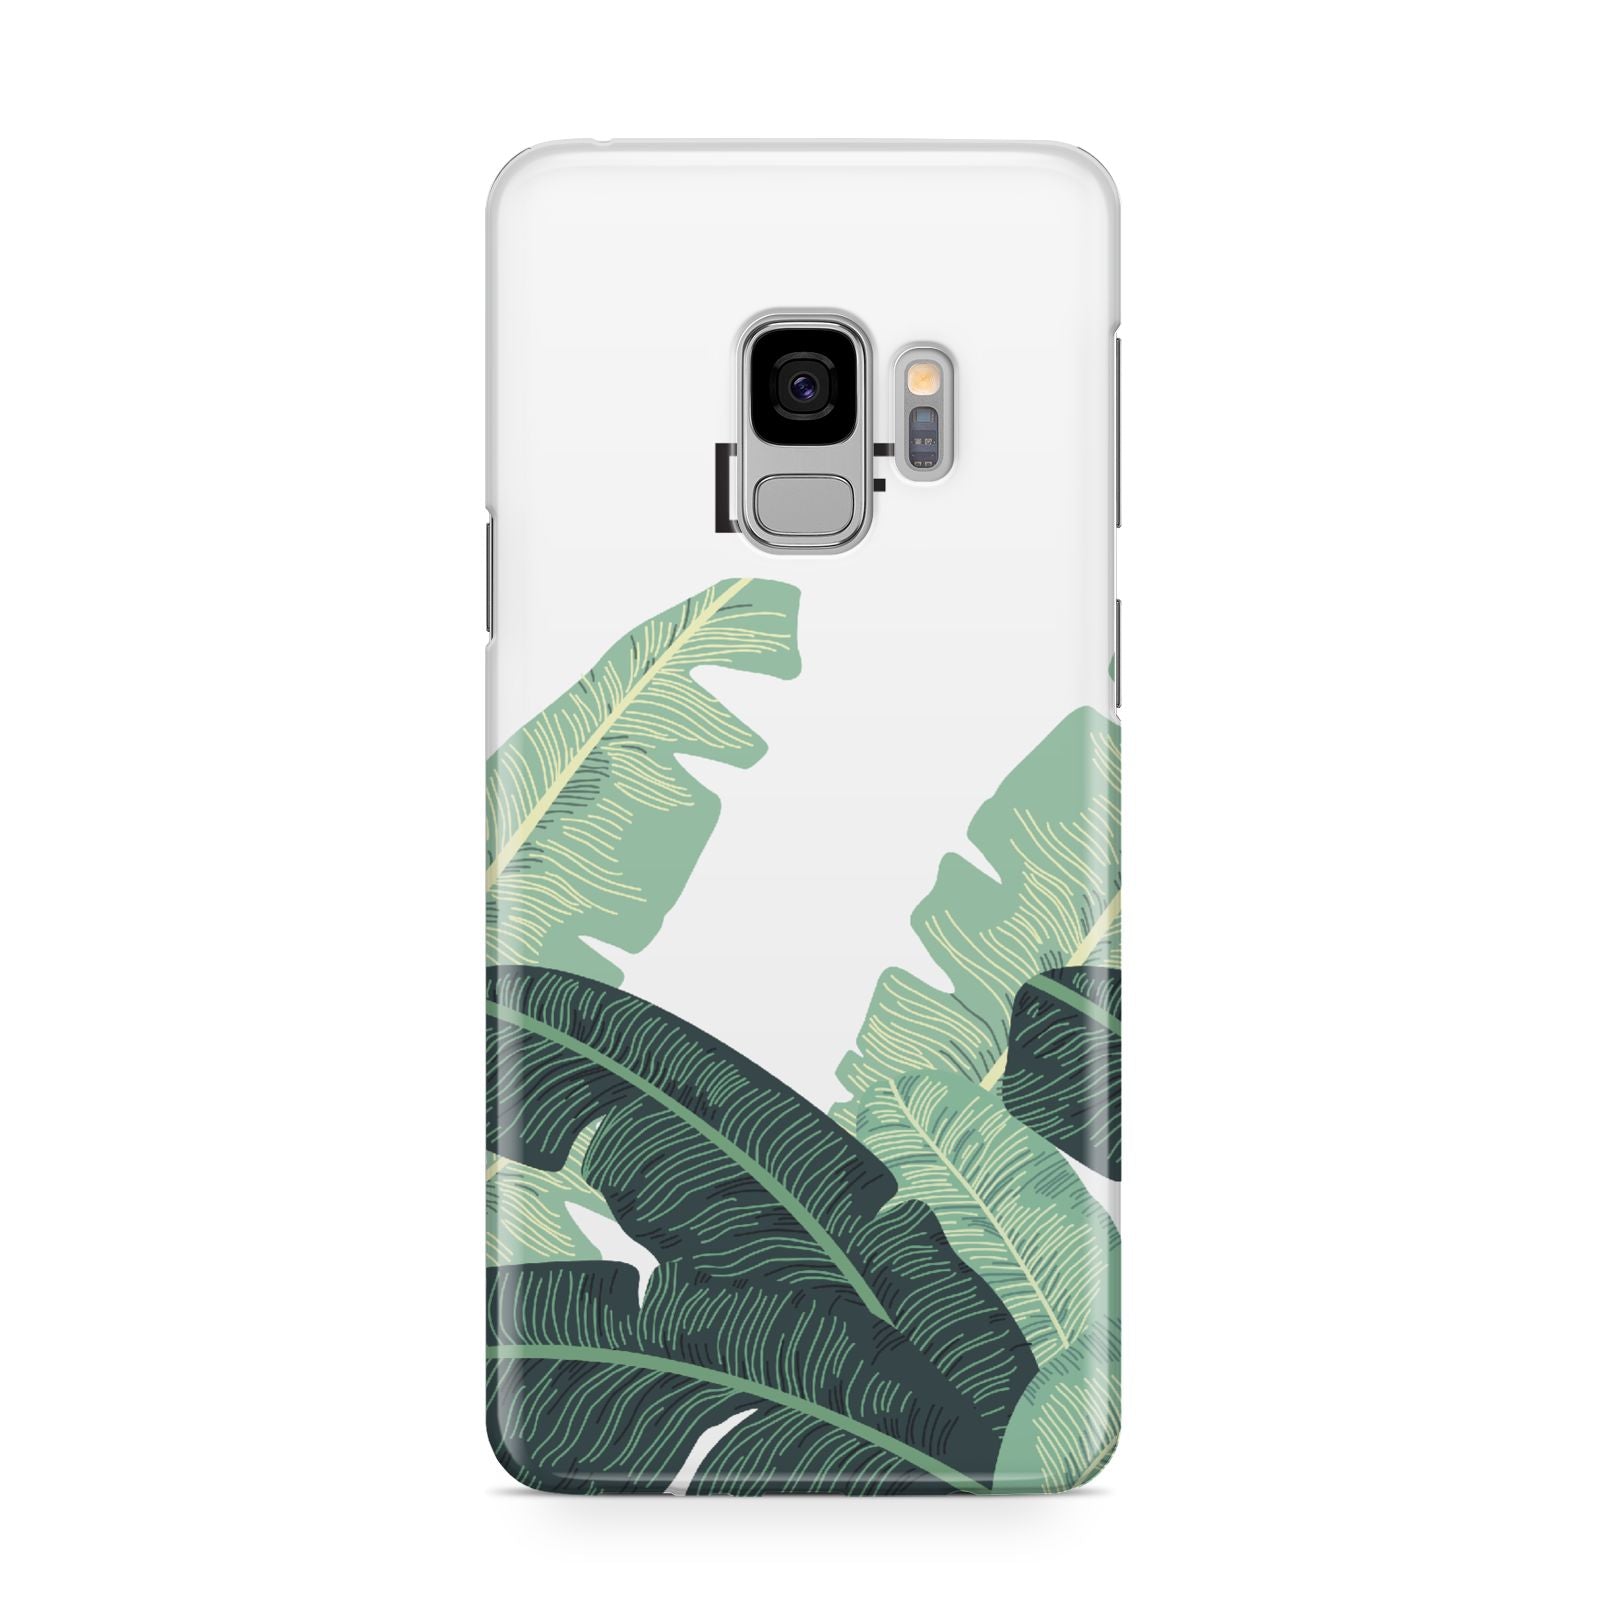 Personalised White Banana Leaf Samsung Galaxy S9 Case